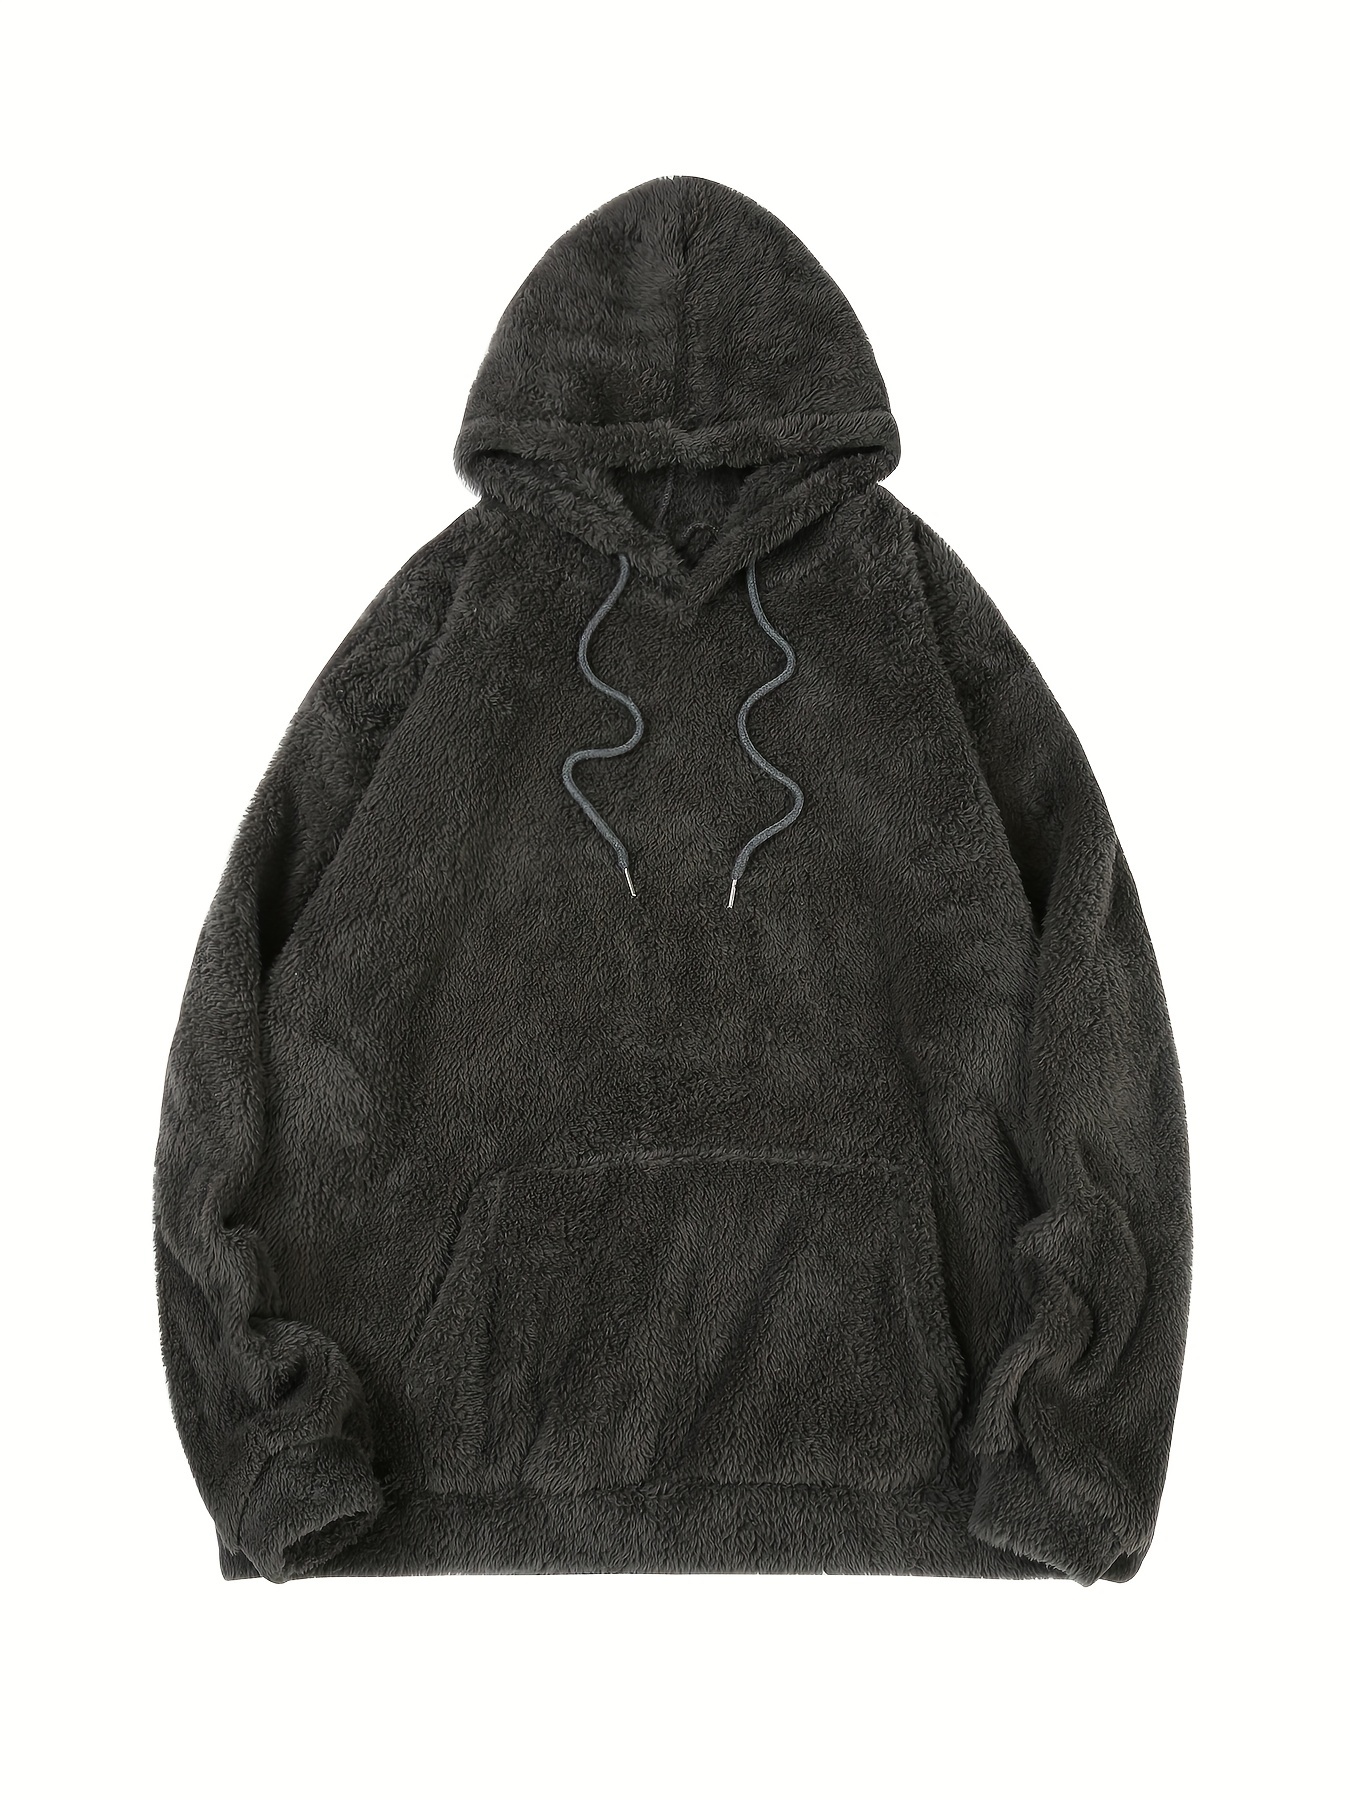 7 Essential Black Hoodie Outfits to Know